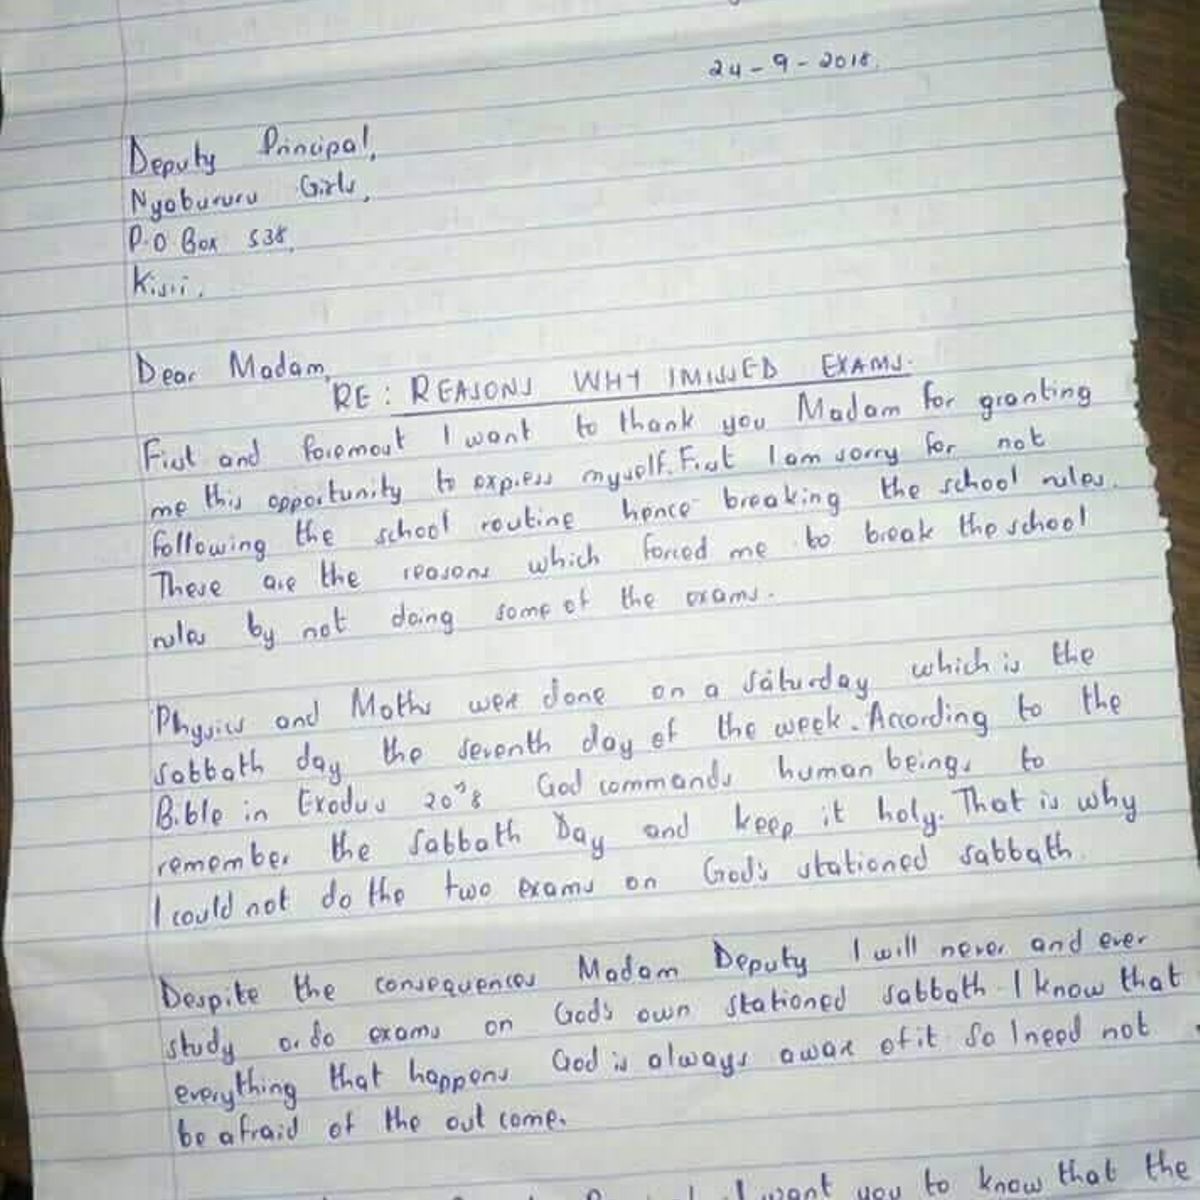 Holy spirit letter: National school suspends student for refusing to ...